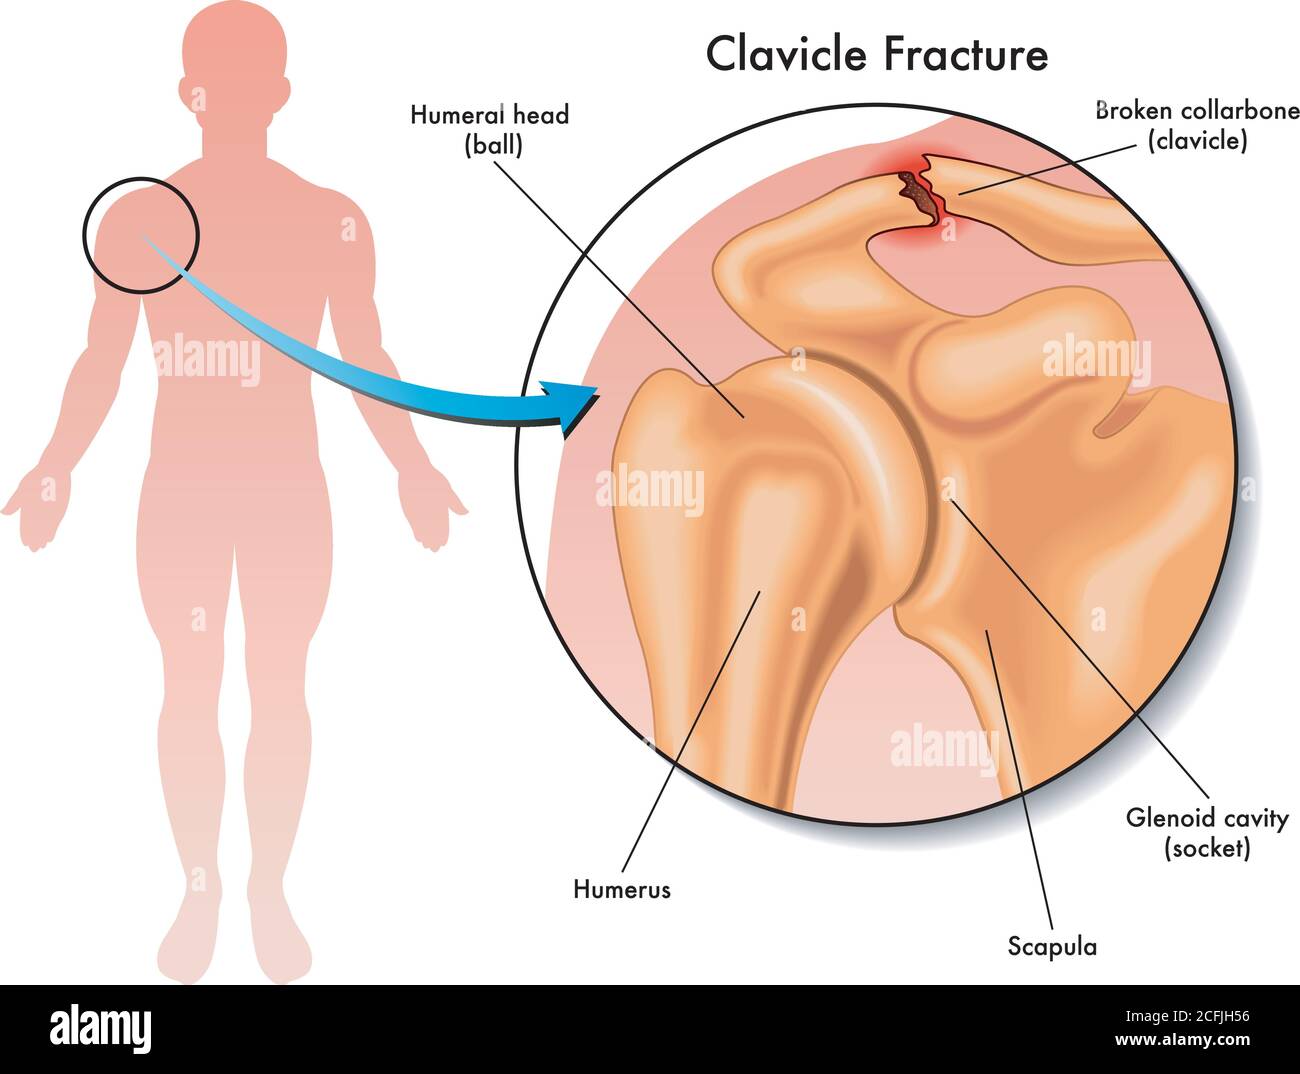 Medical illustration of a clavicle fracture and its location in the human body, with annotations. Stock Vector